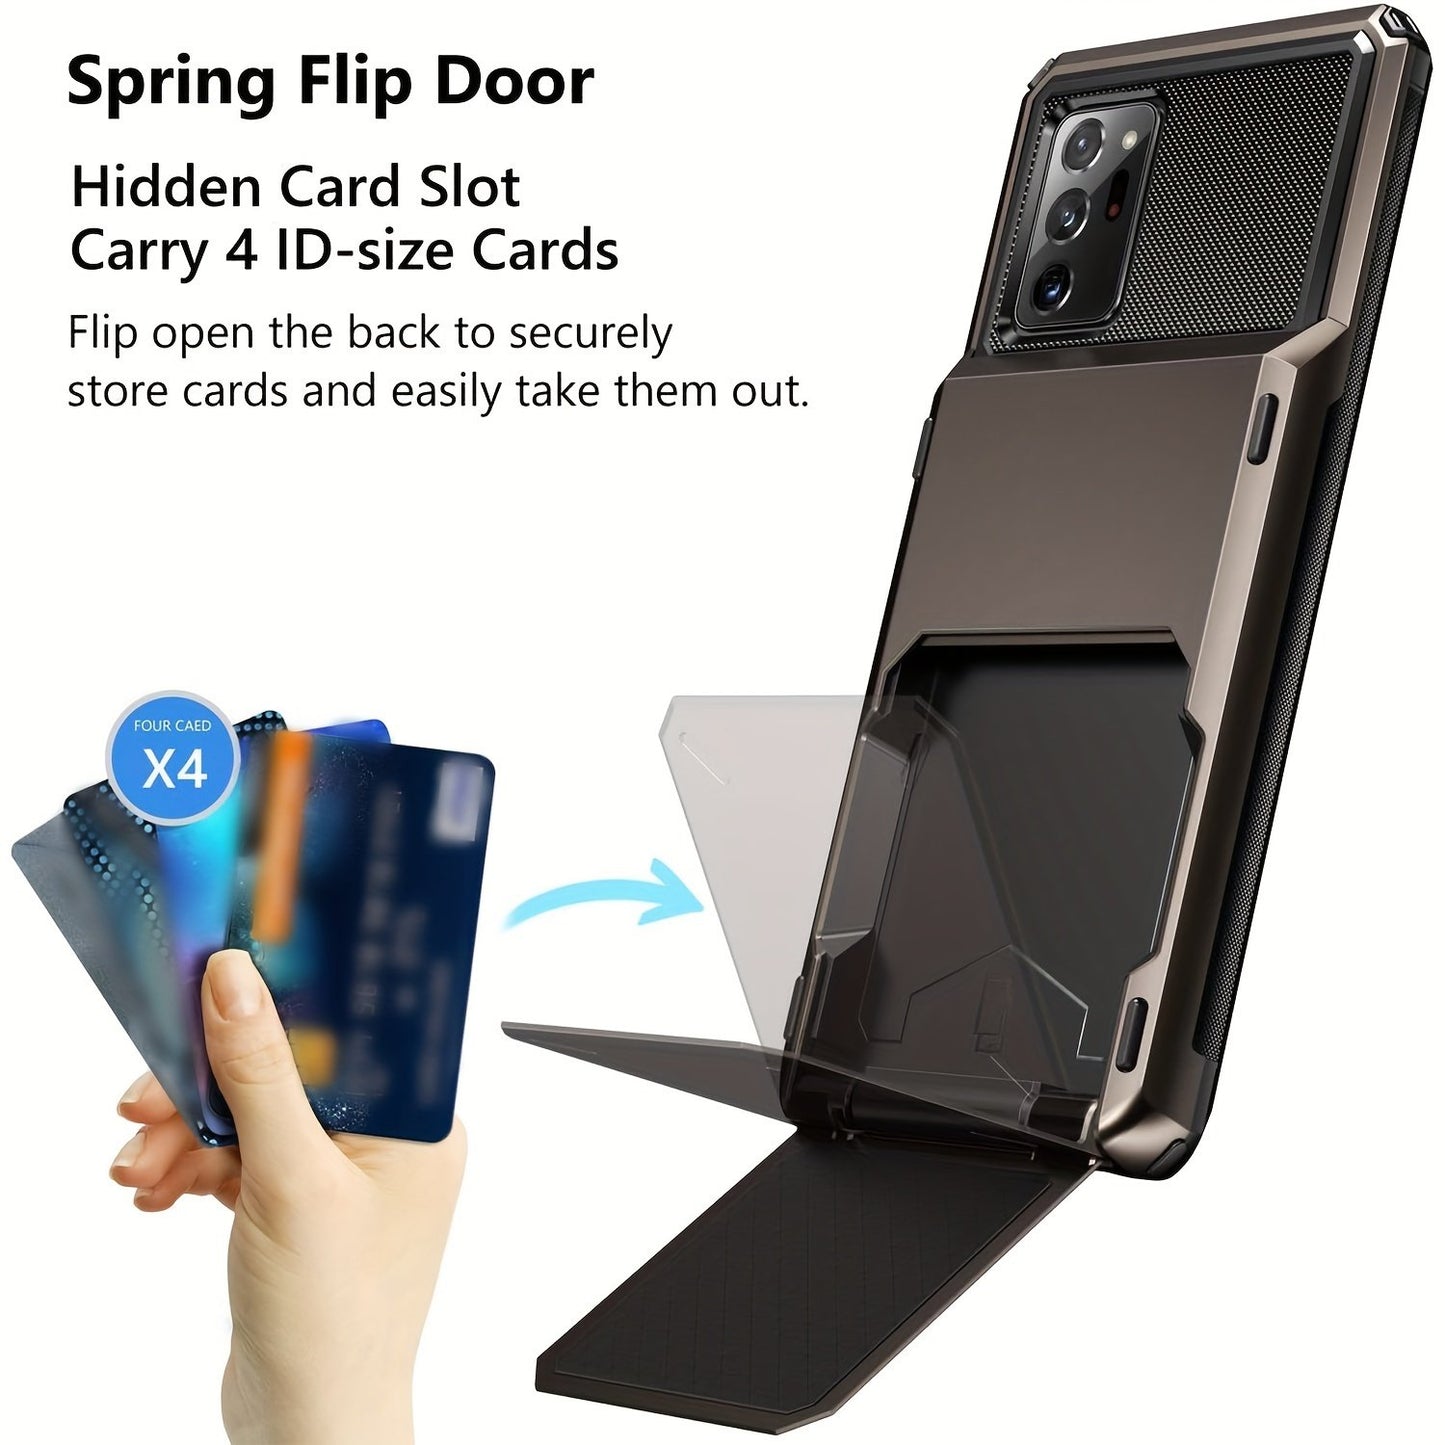 For Samsung Galaxy Note 20 Ultra Note 8/9 Note 10 Pro Case 5G Wallet 4-Card Flip Cover Credit Card Holder Slot Back Pocket Dual Layer Protective Hybrid Hard Shell Bumper Armor Case